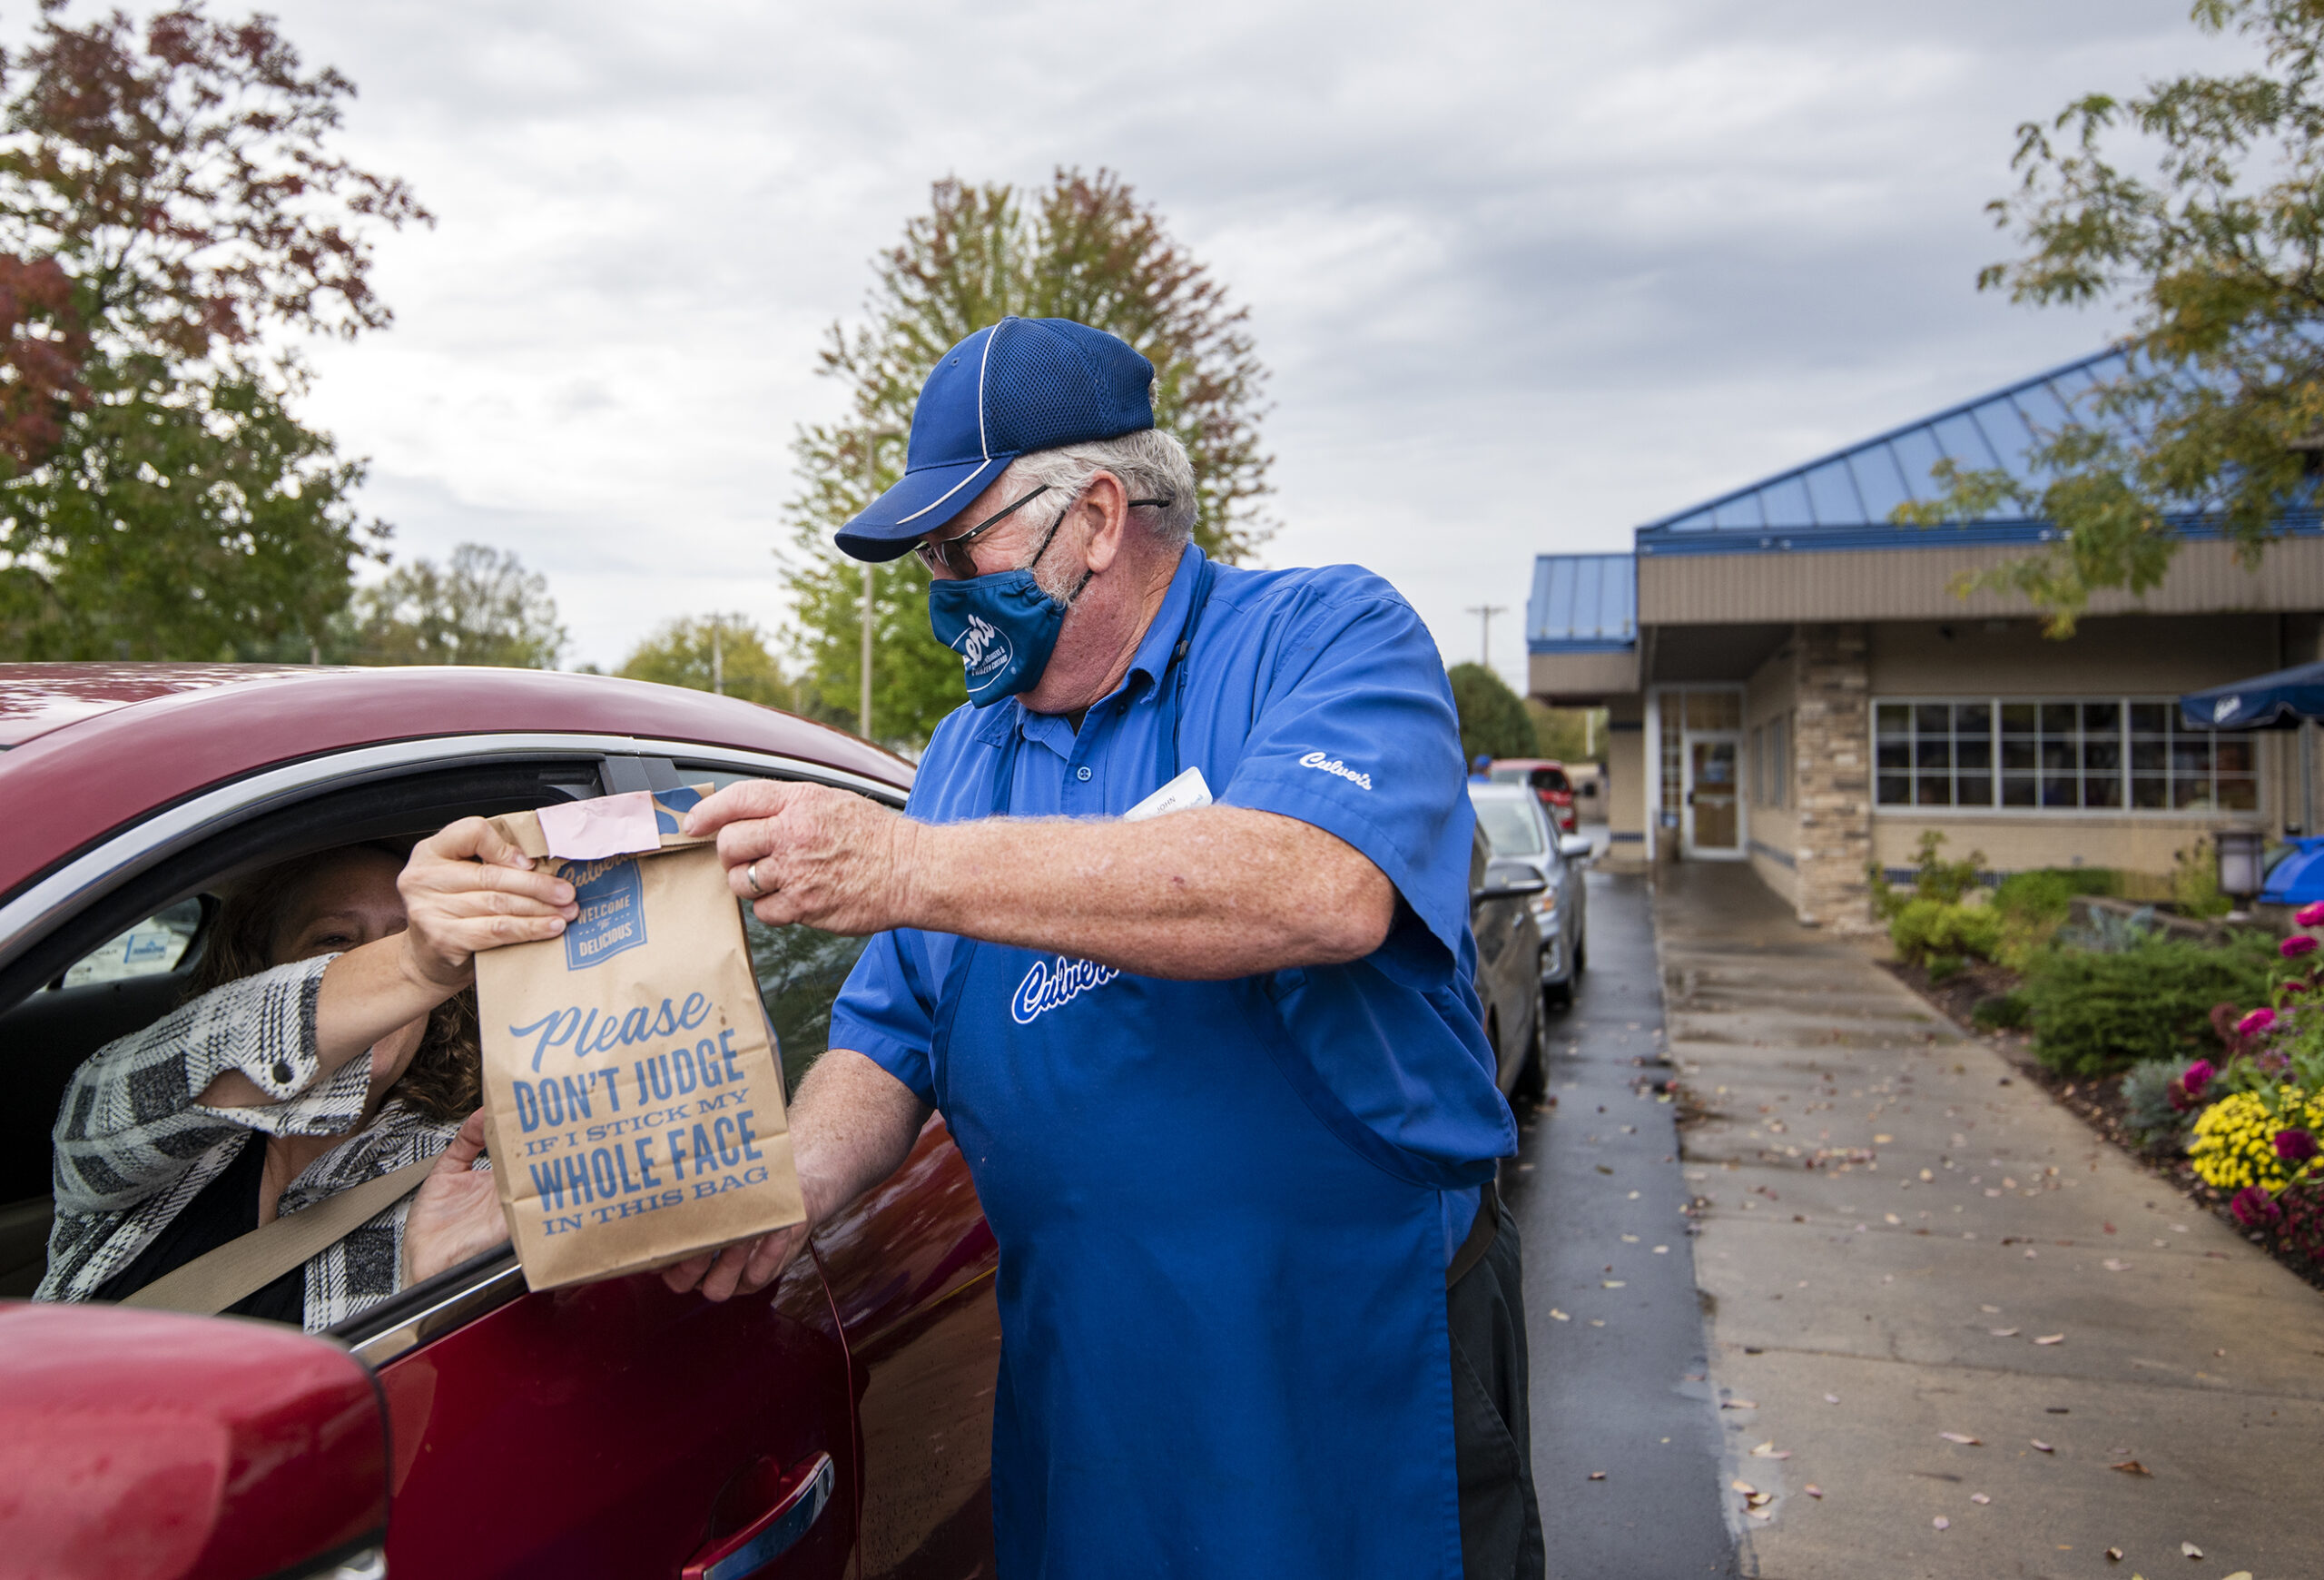 A worker in a blue uniform hands a paper bag with food to a driver in a red sedan outside of the restaurant.